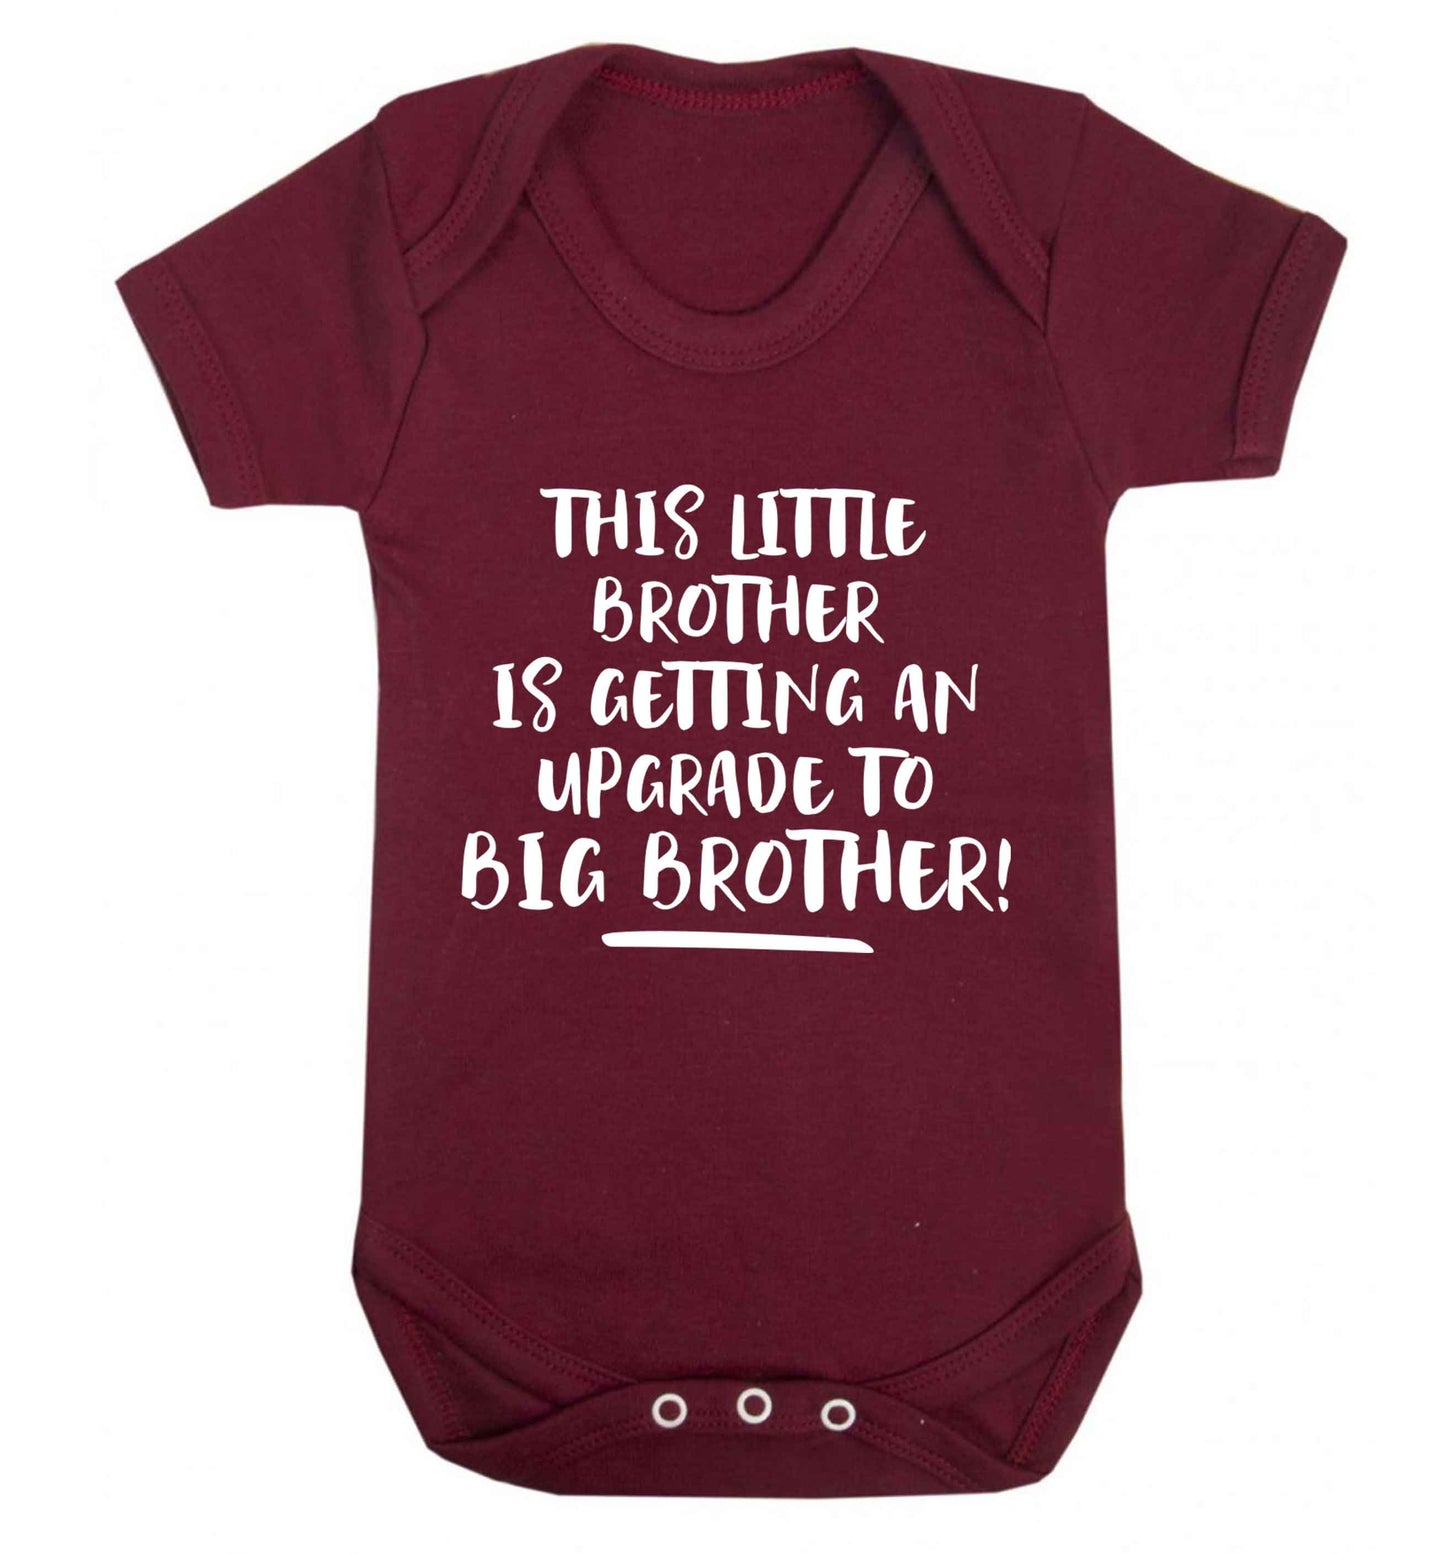 This little brother is getting an upgrade to big brother! Baby Vest maroon 18-24 months